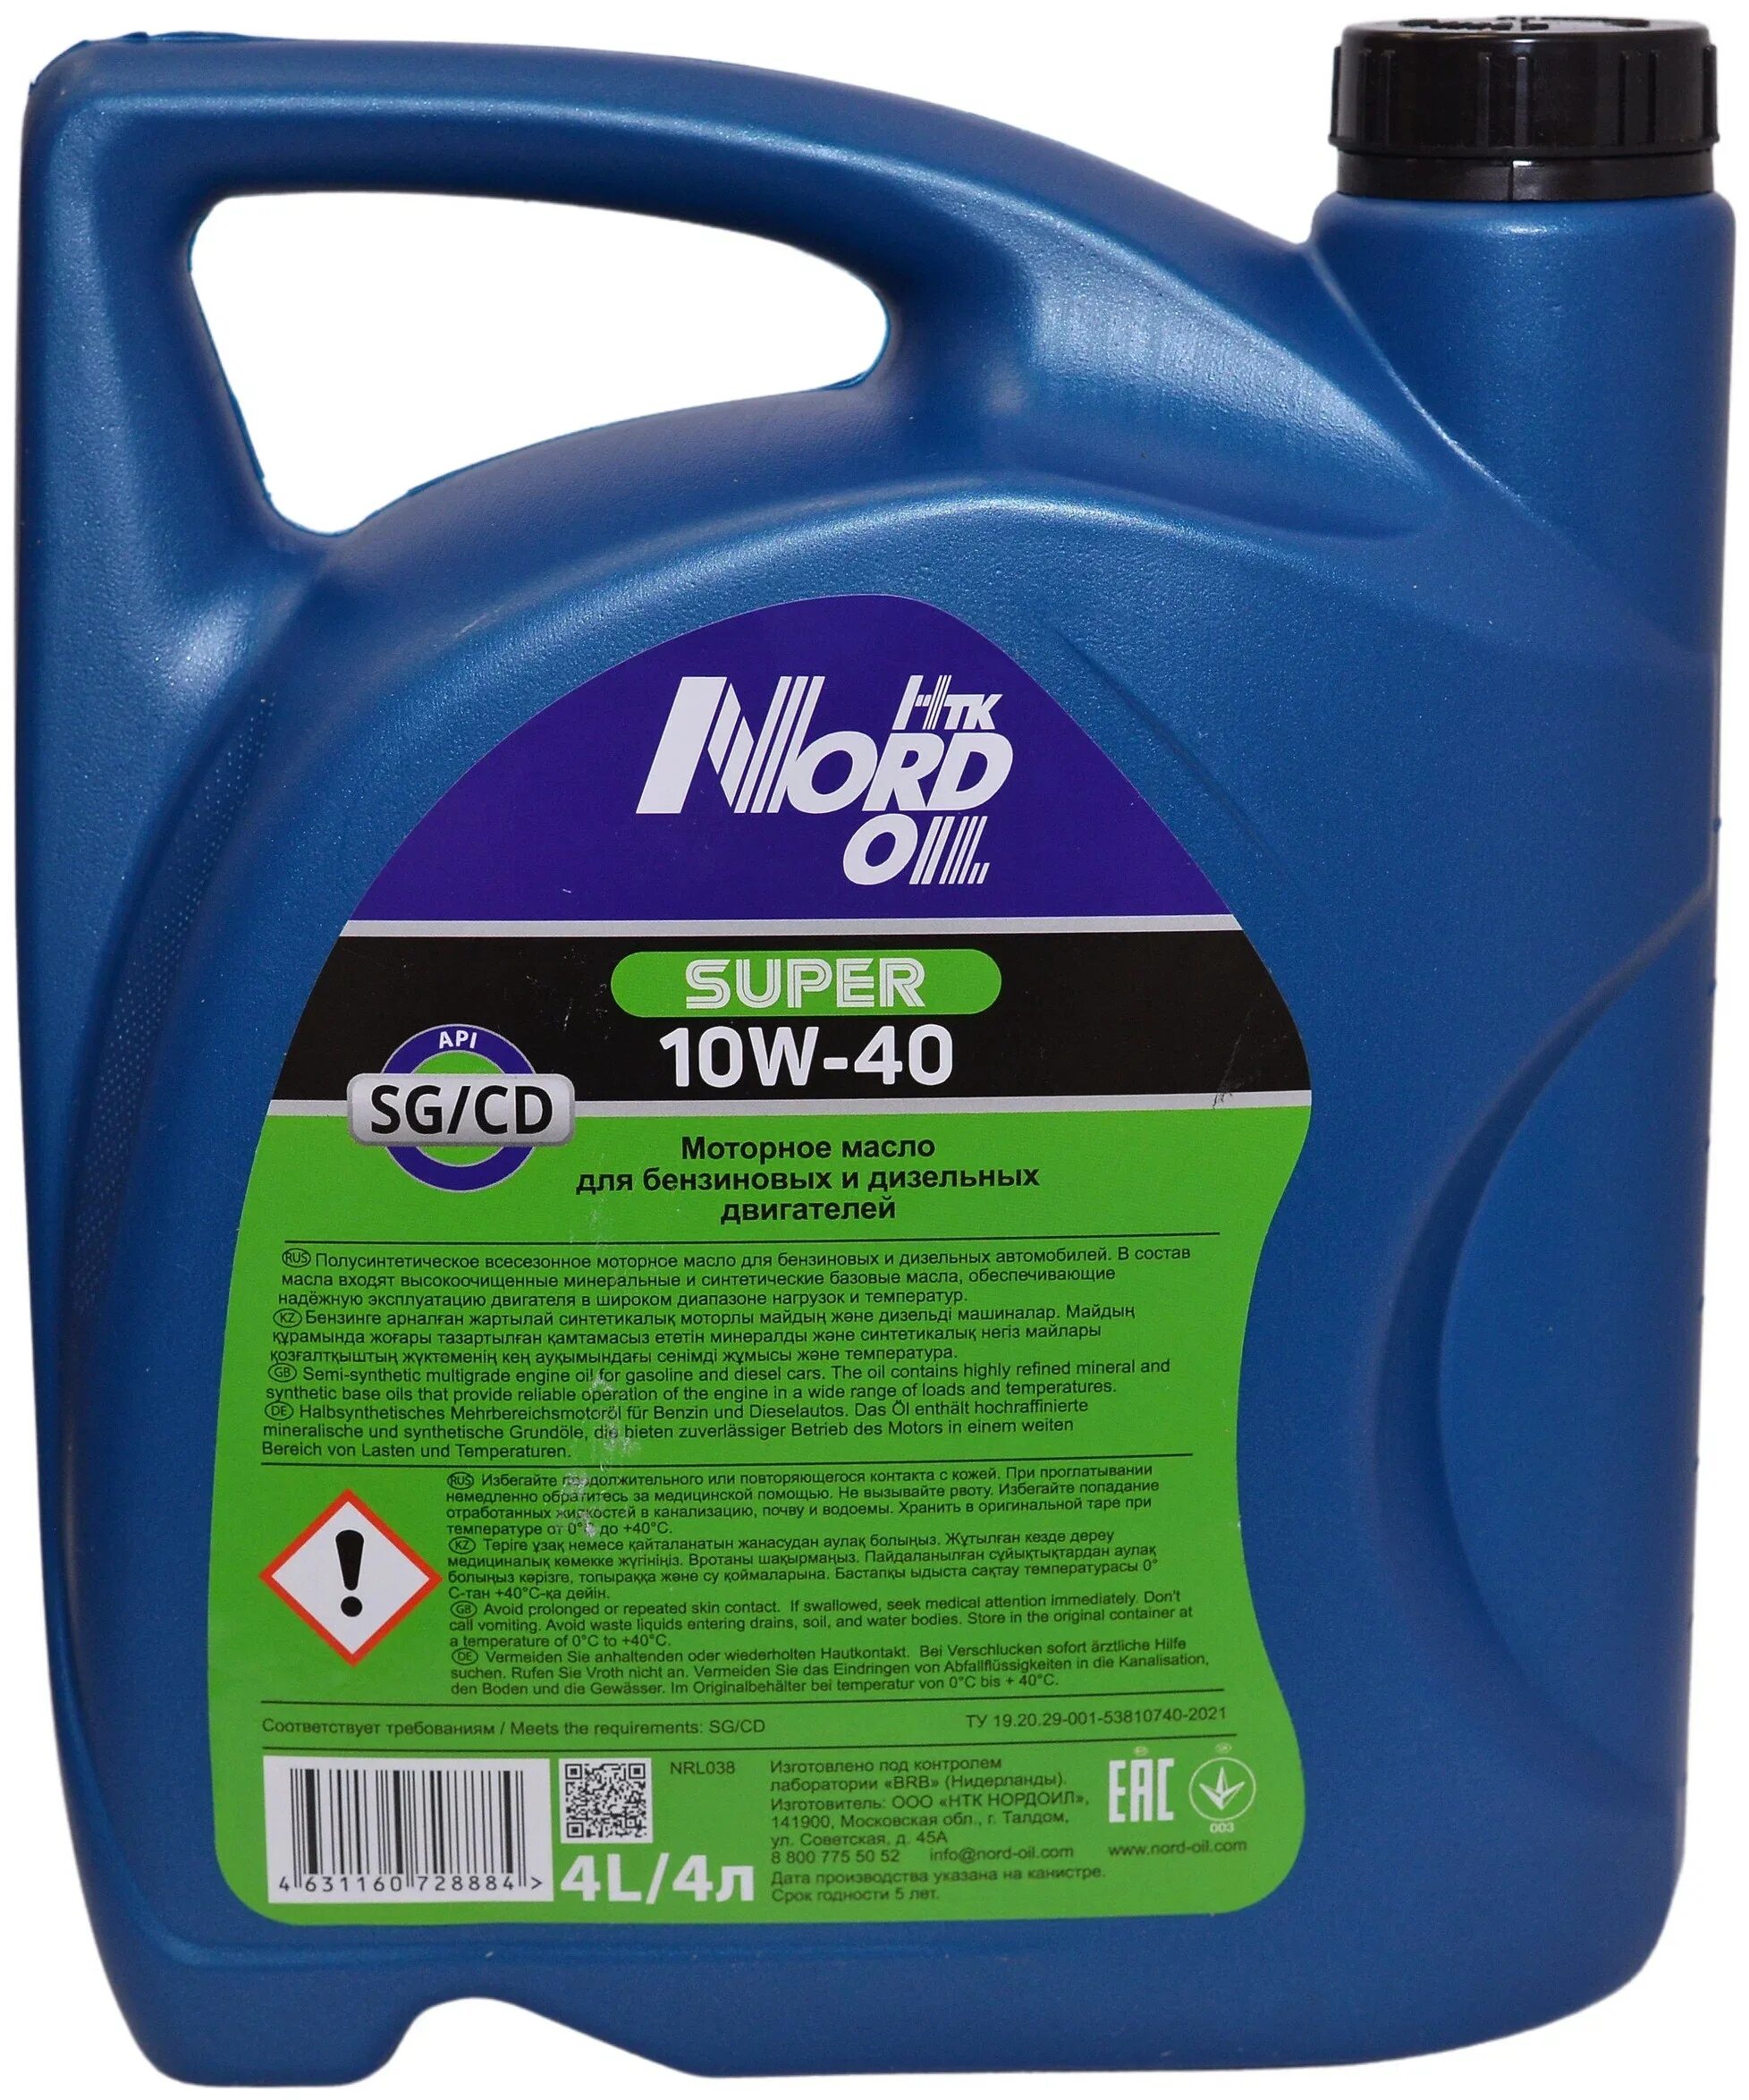 Масло Nord Oil 10 40. Nord Oil nrl038 масло моторное Nord Oil super 10w-4. Nrl038 Nord Oil масло Nord Oil super 10w-40 SG/CD 4л. Моторное масло BQ.